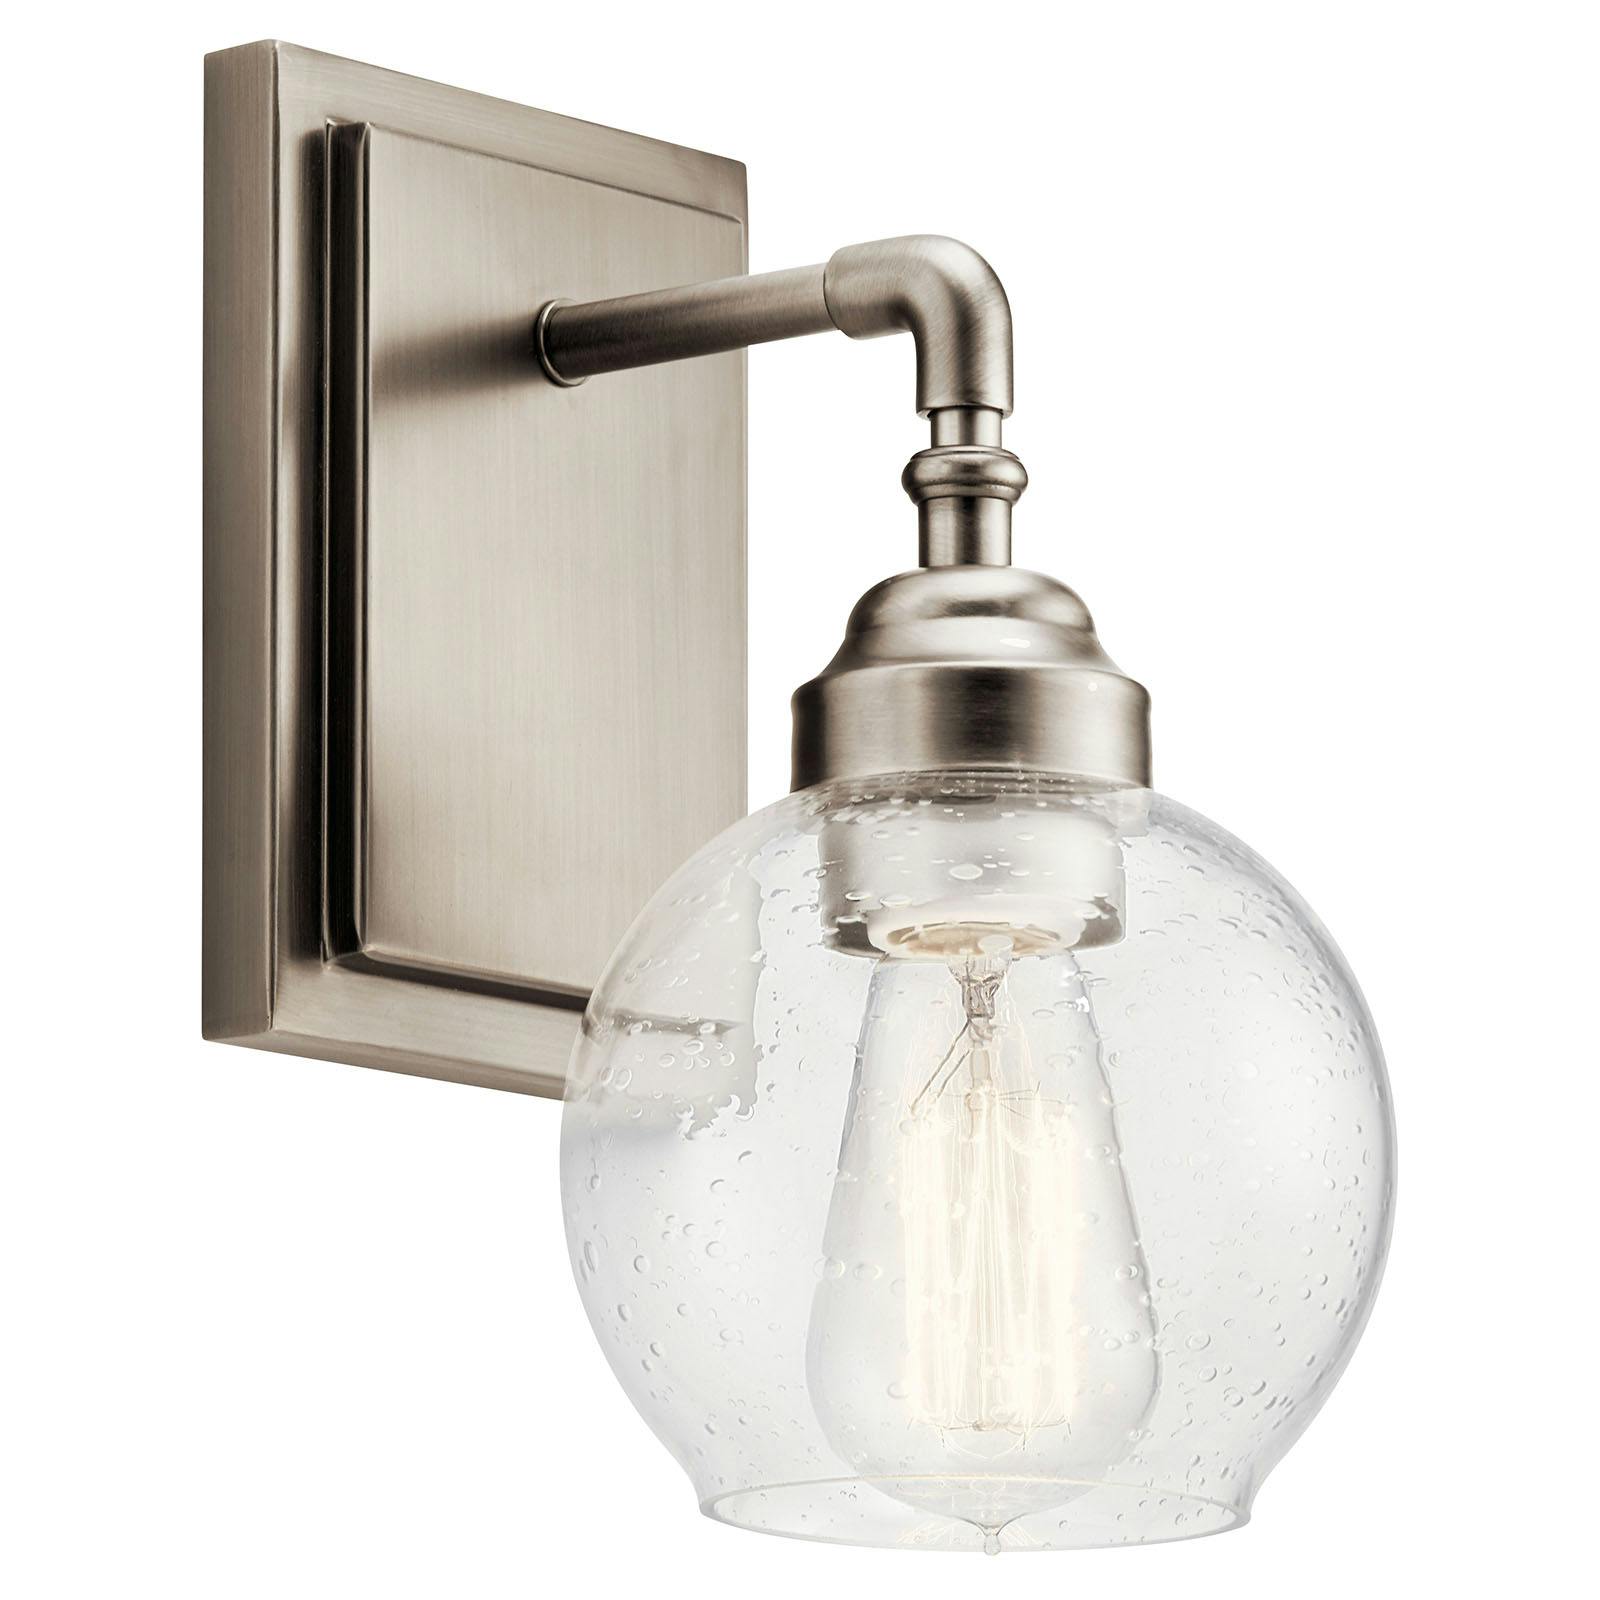 The Niles 1 Light Wall Sconce Antique Pewter facing down on a white background